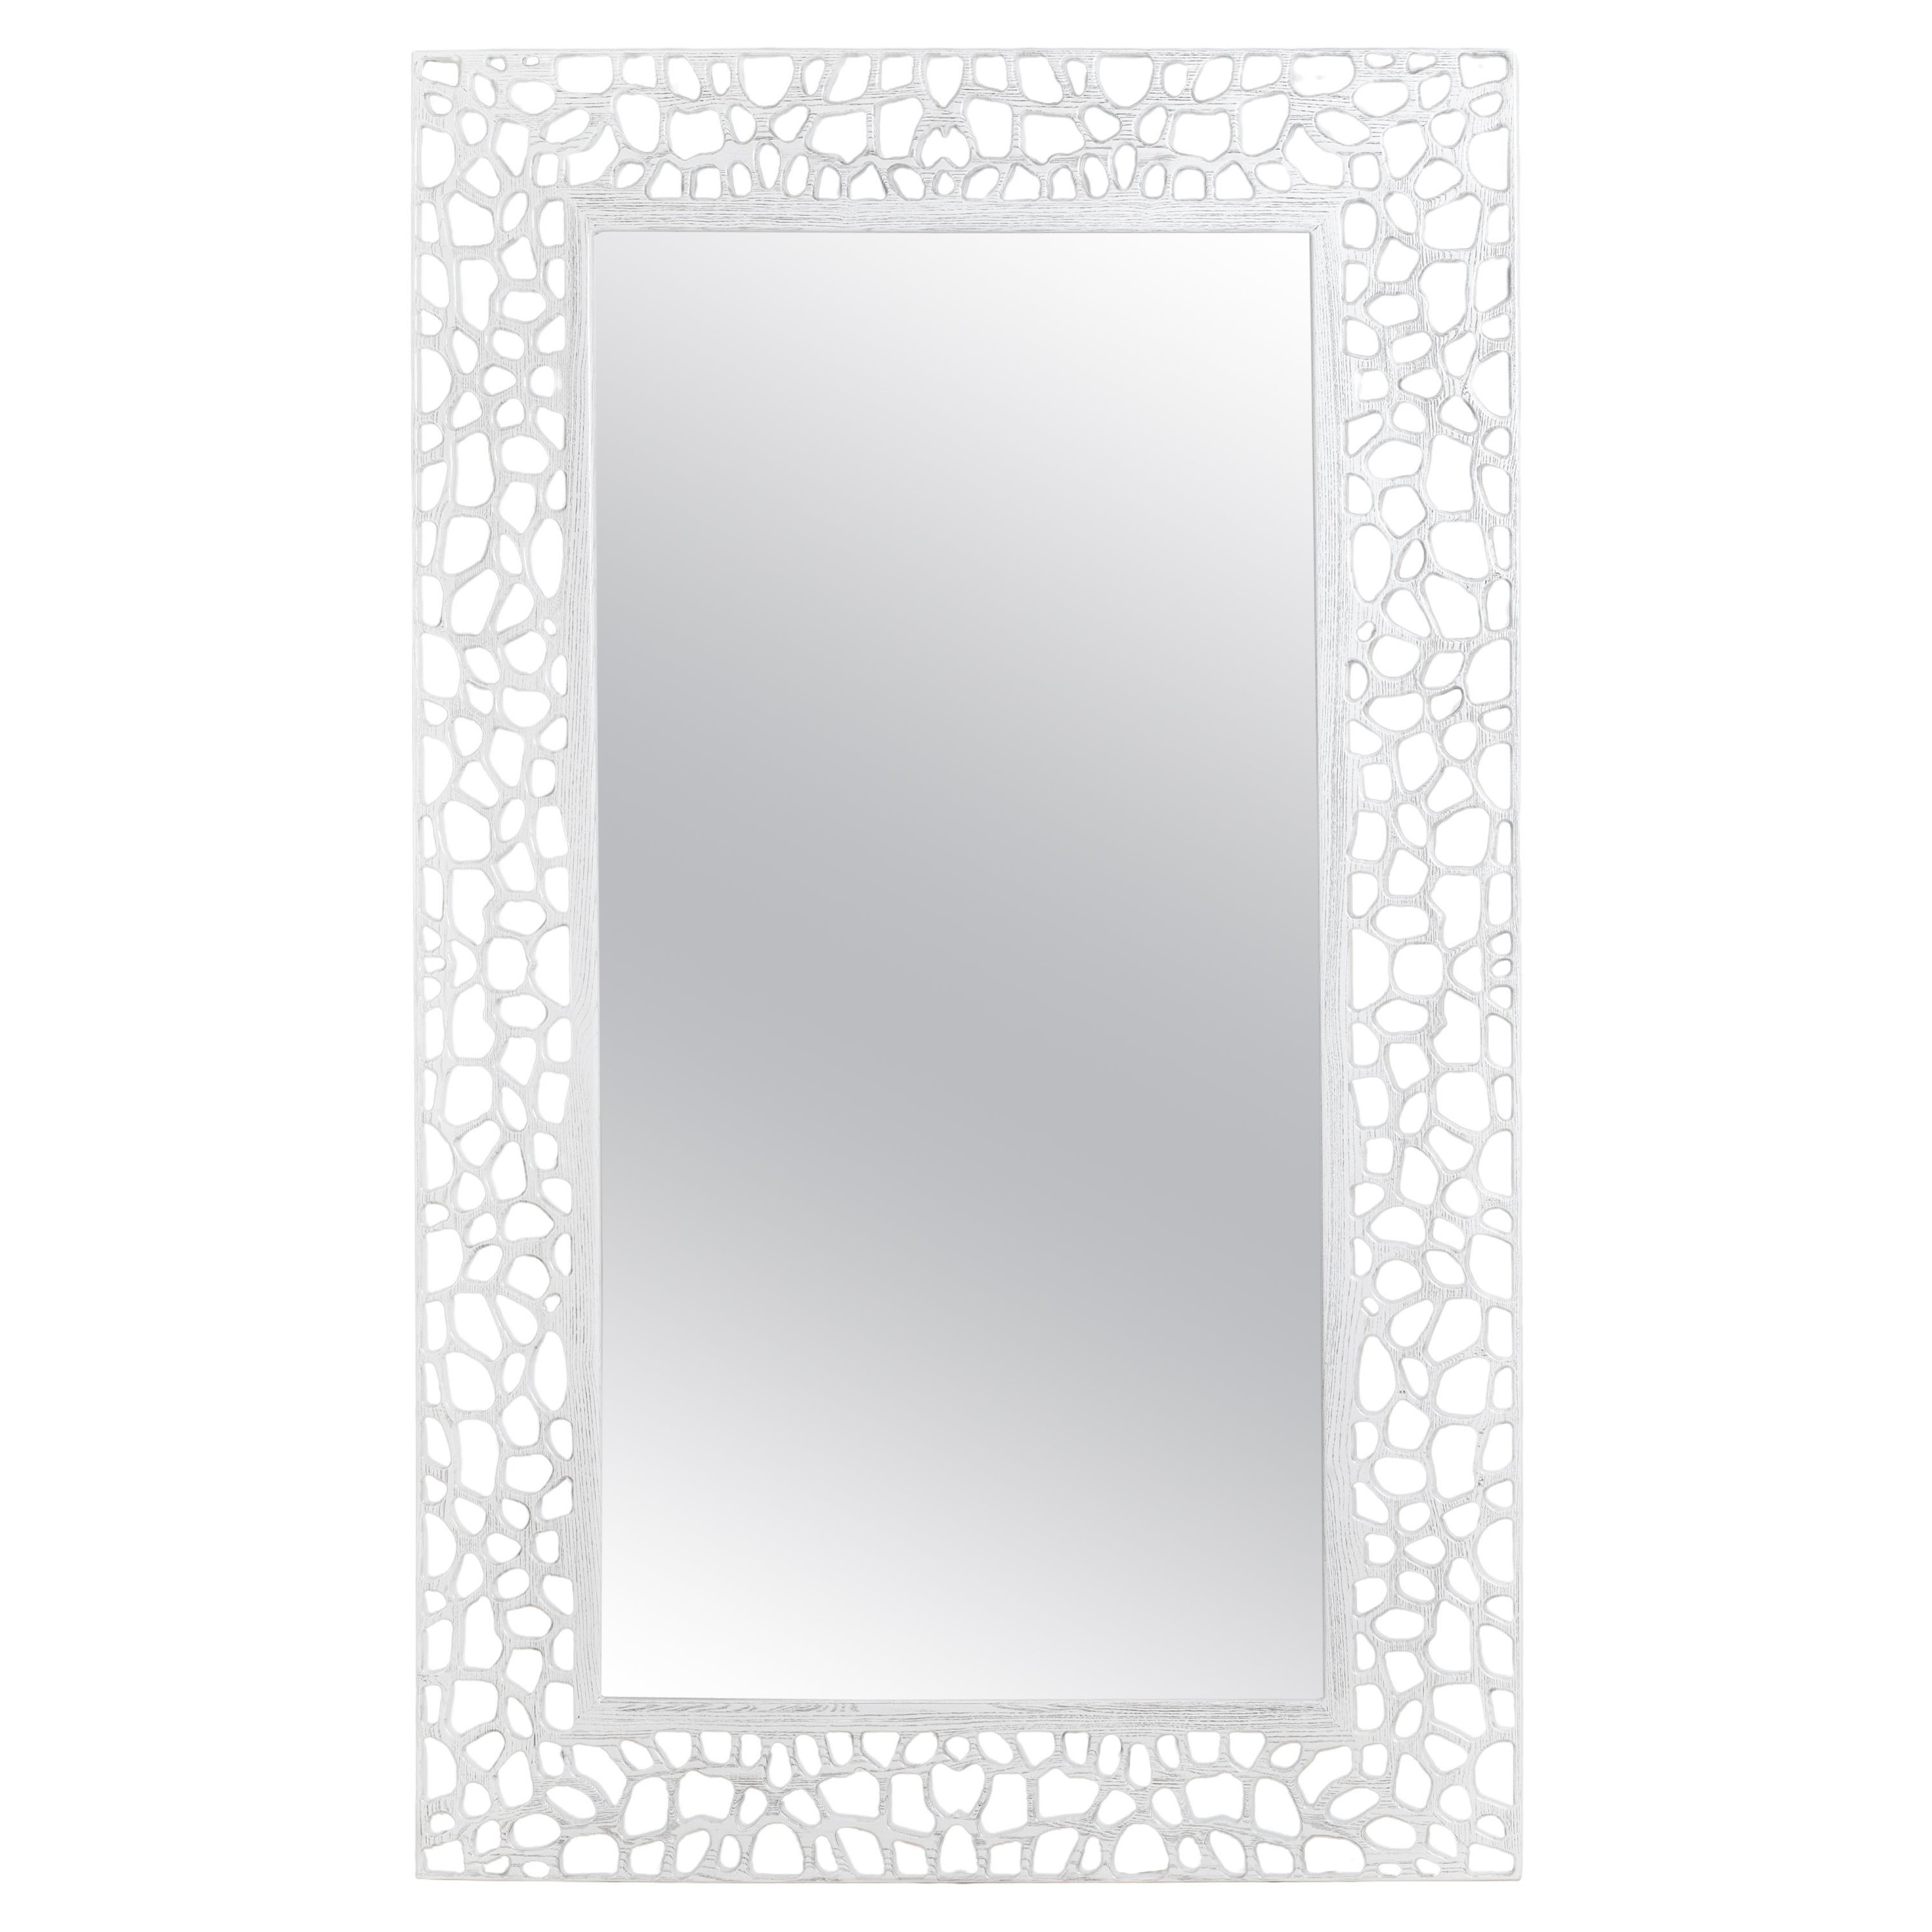 (Final Payment Listing) Angola White Wood Mirror For Sale